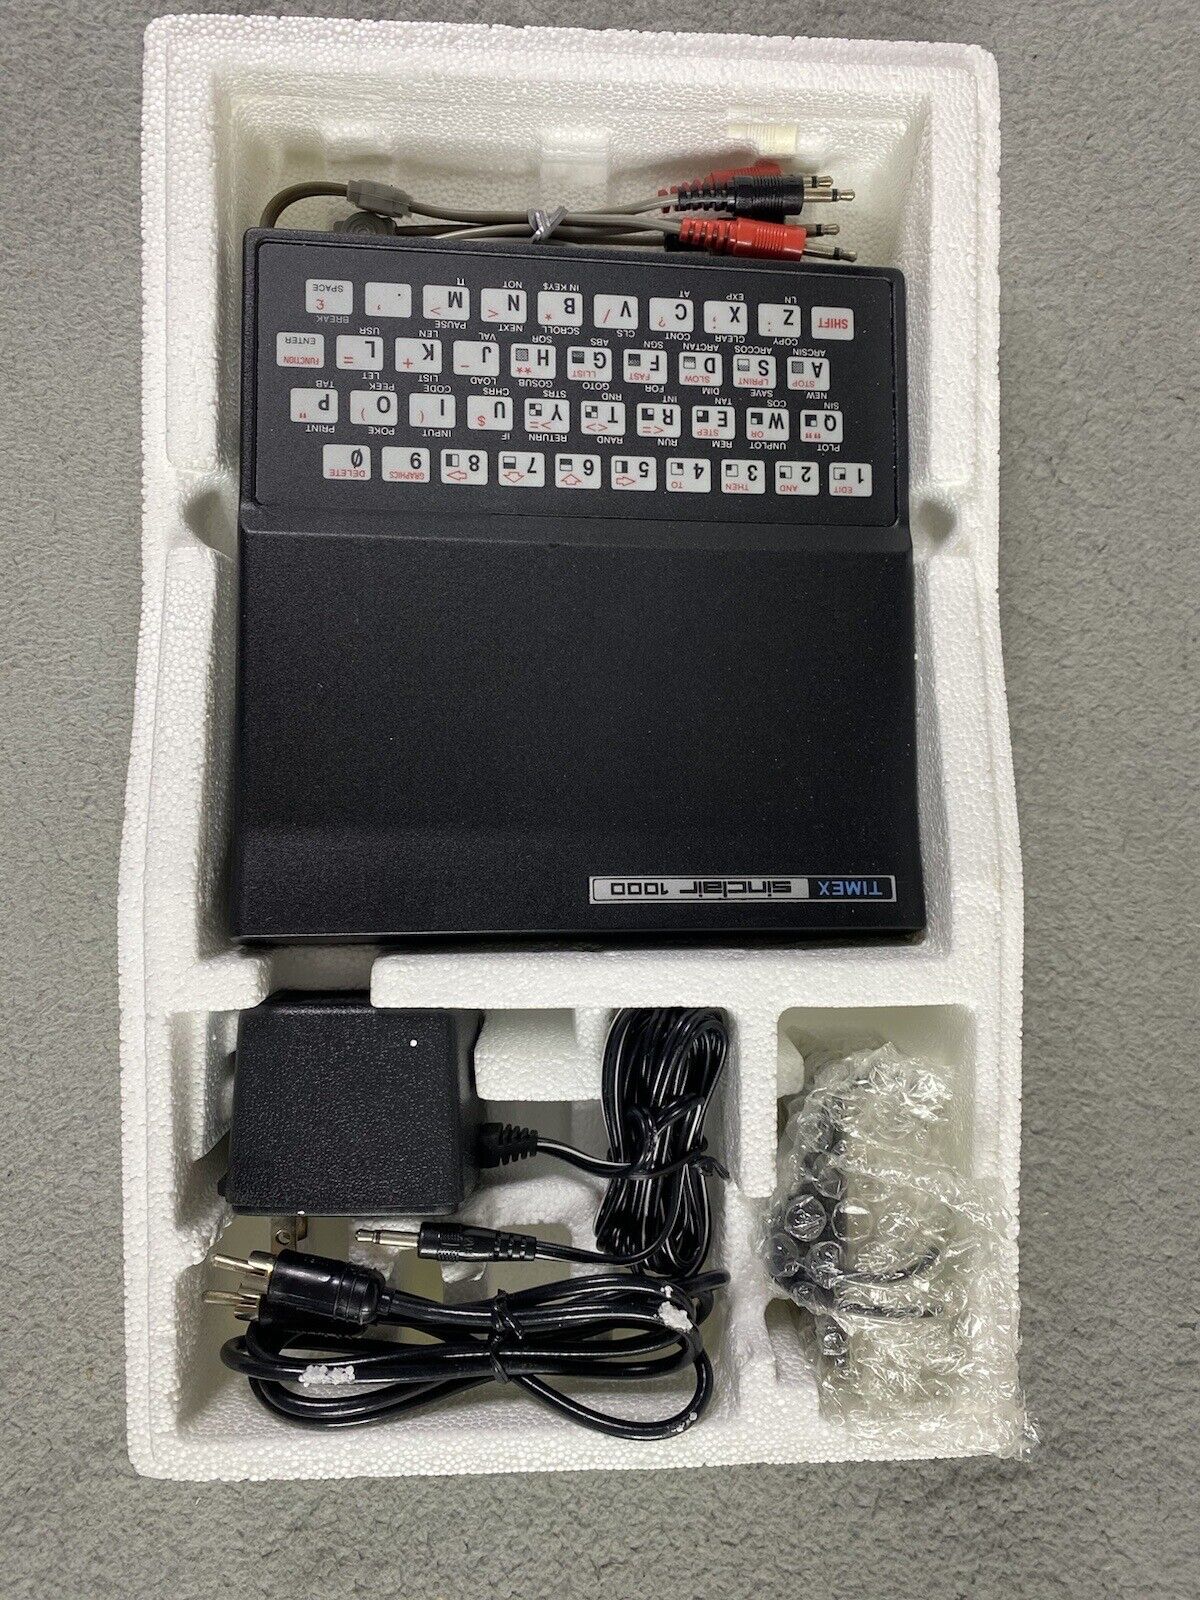 Timex Personal Computer Sinclair 1000 Vintage OPEN BOX Working Manual Ram VTG